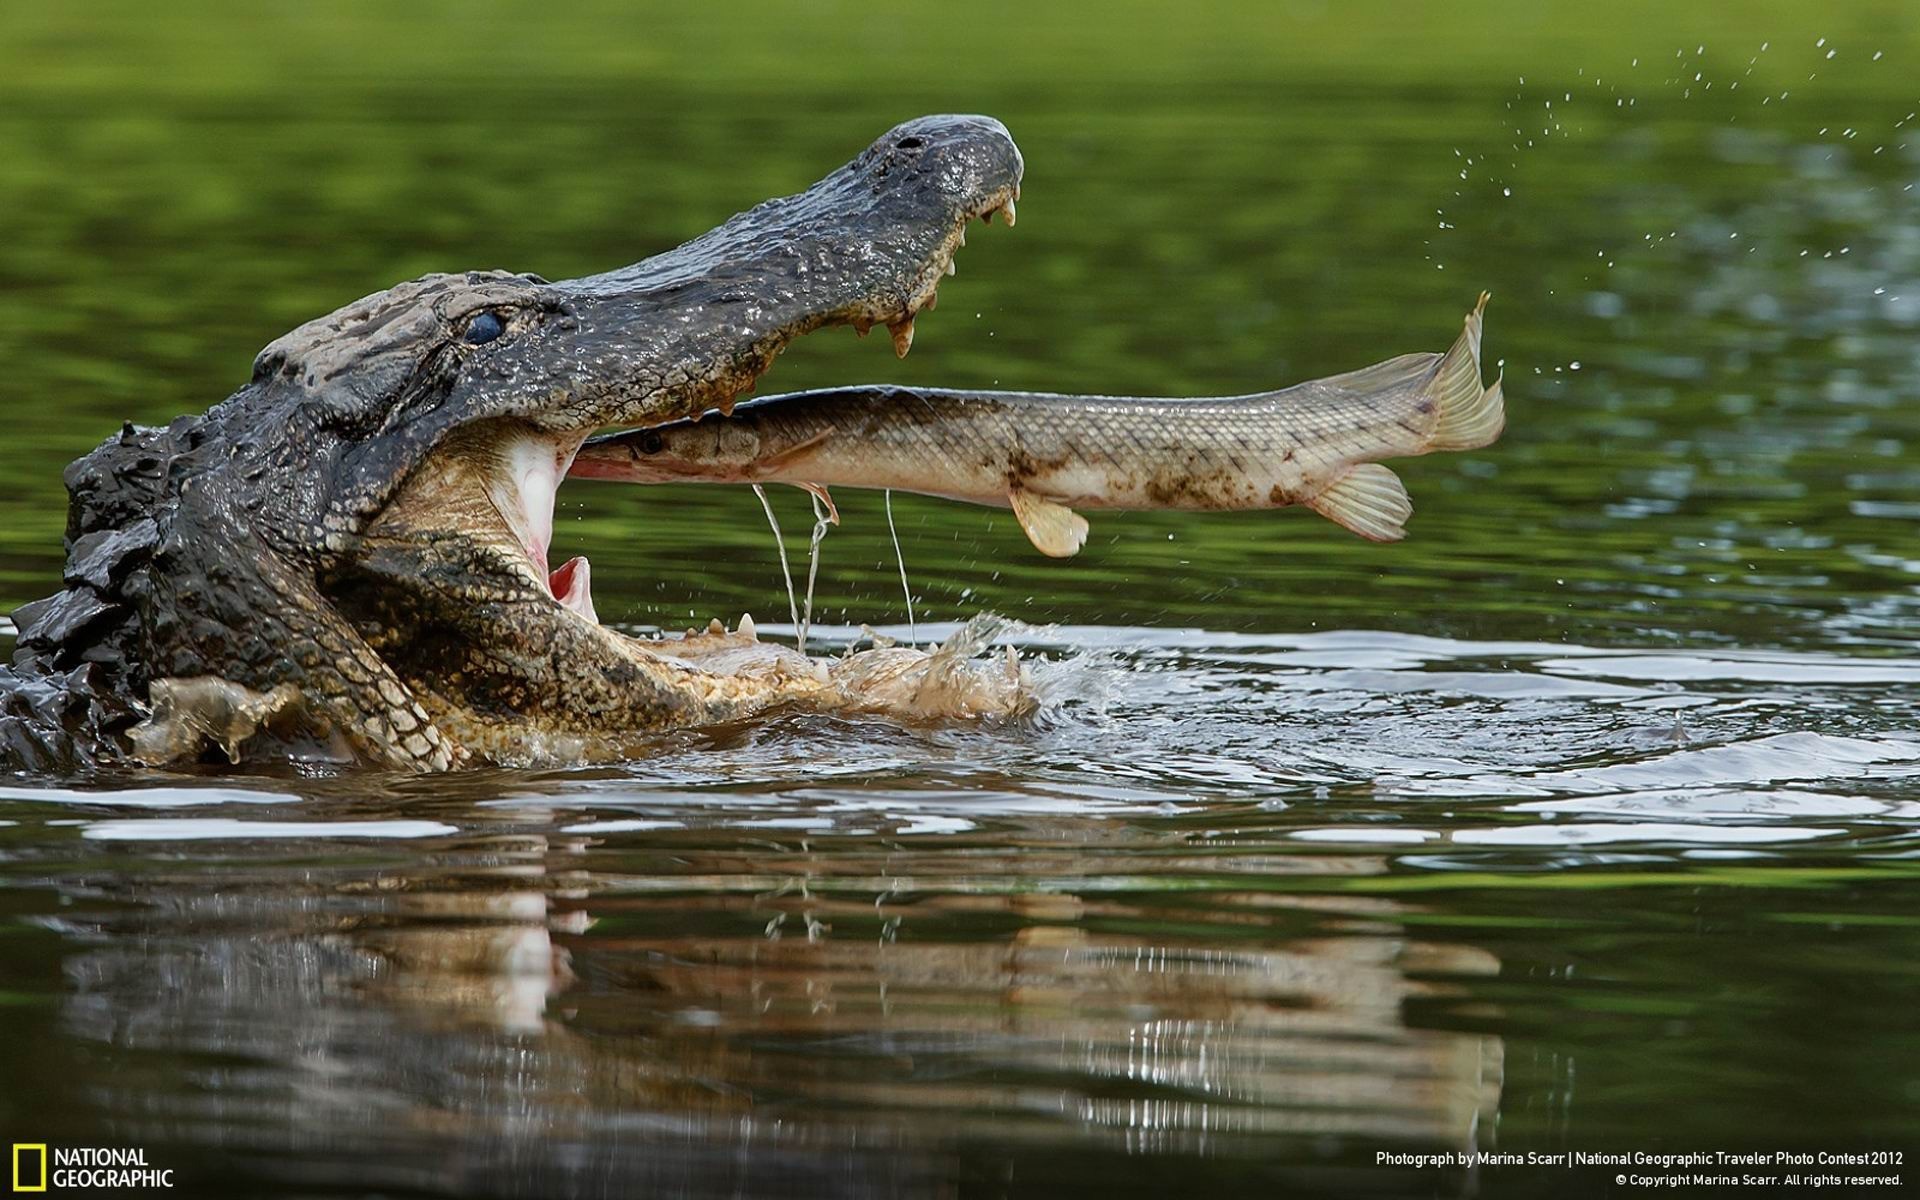 General 1920x1200 nature animals alligators fish reptiles food National Geographic 2012 (Year) open mouth fangs crocodiles water Marina Scarr watermarked Crocodile (One Piece)